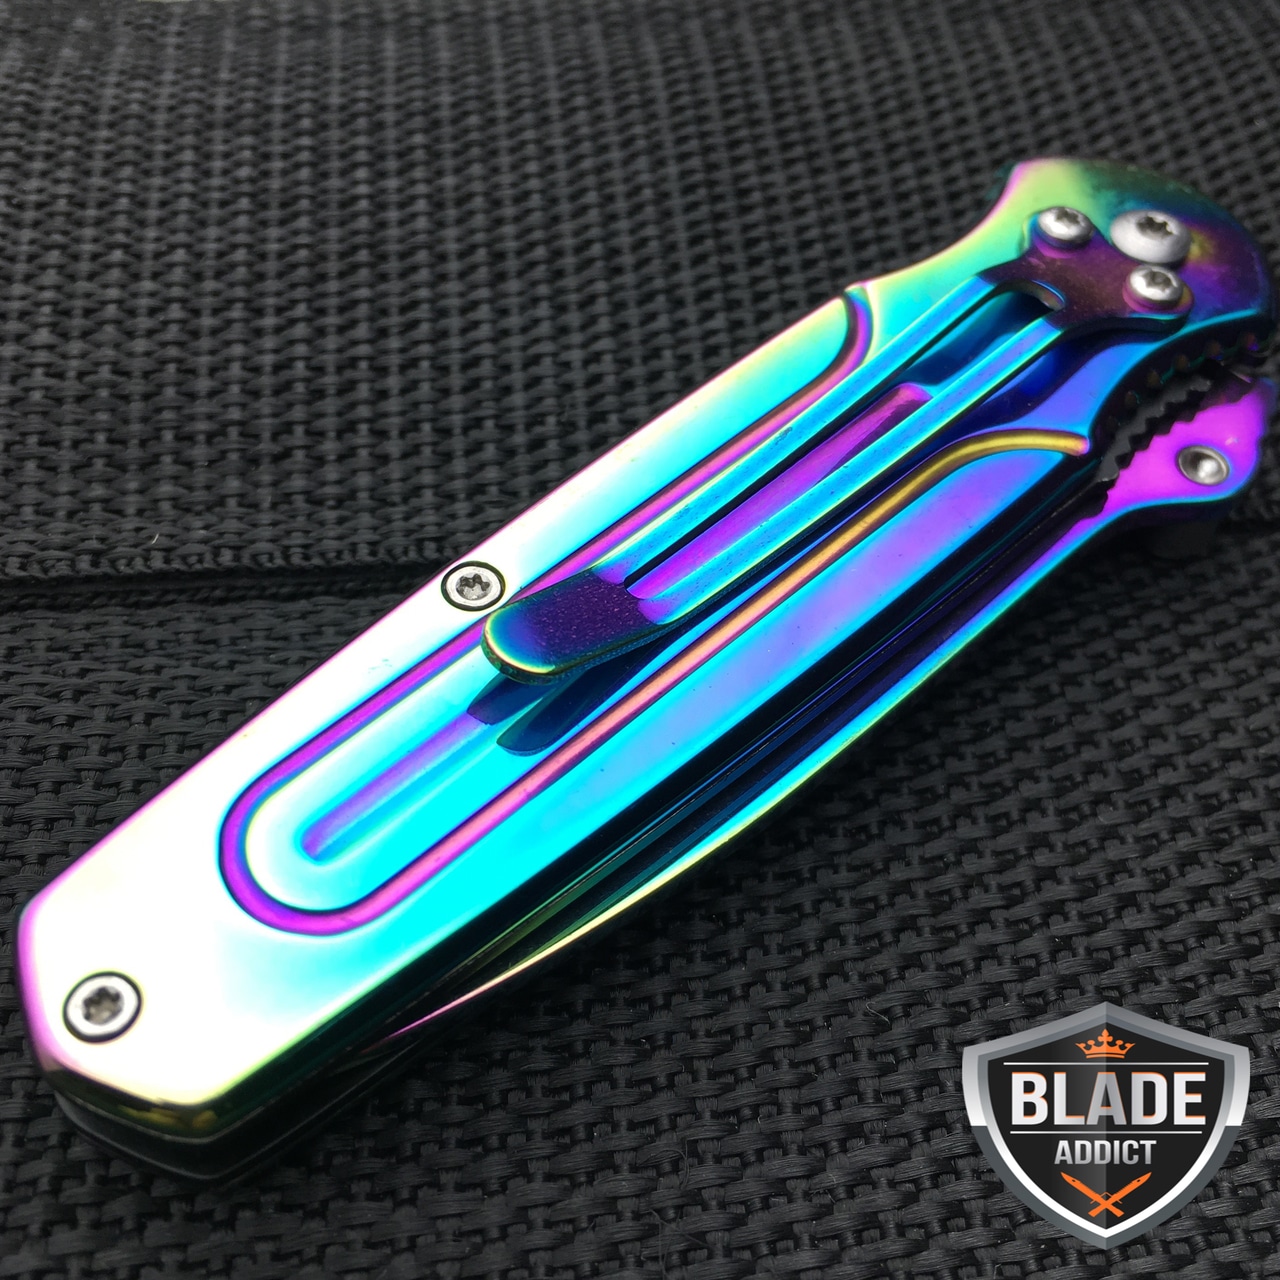 6.5" TITANIUM RAINBOW TACTICAL SPRING ASSISTED OPEN FOLDING POCKET